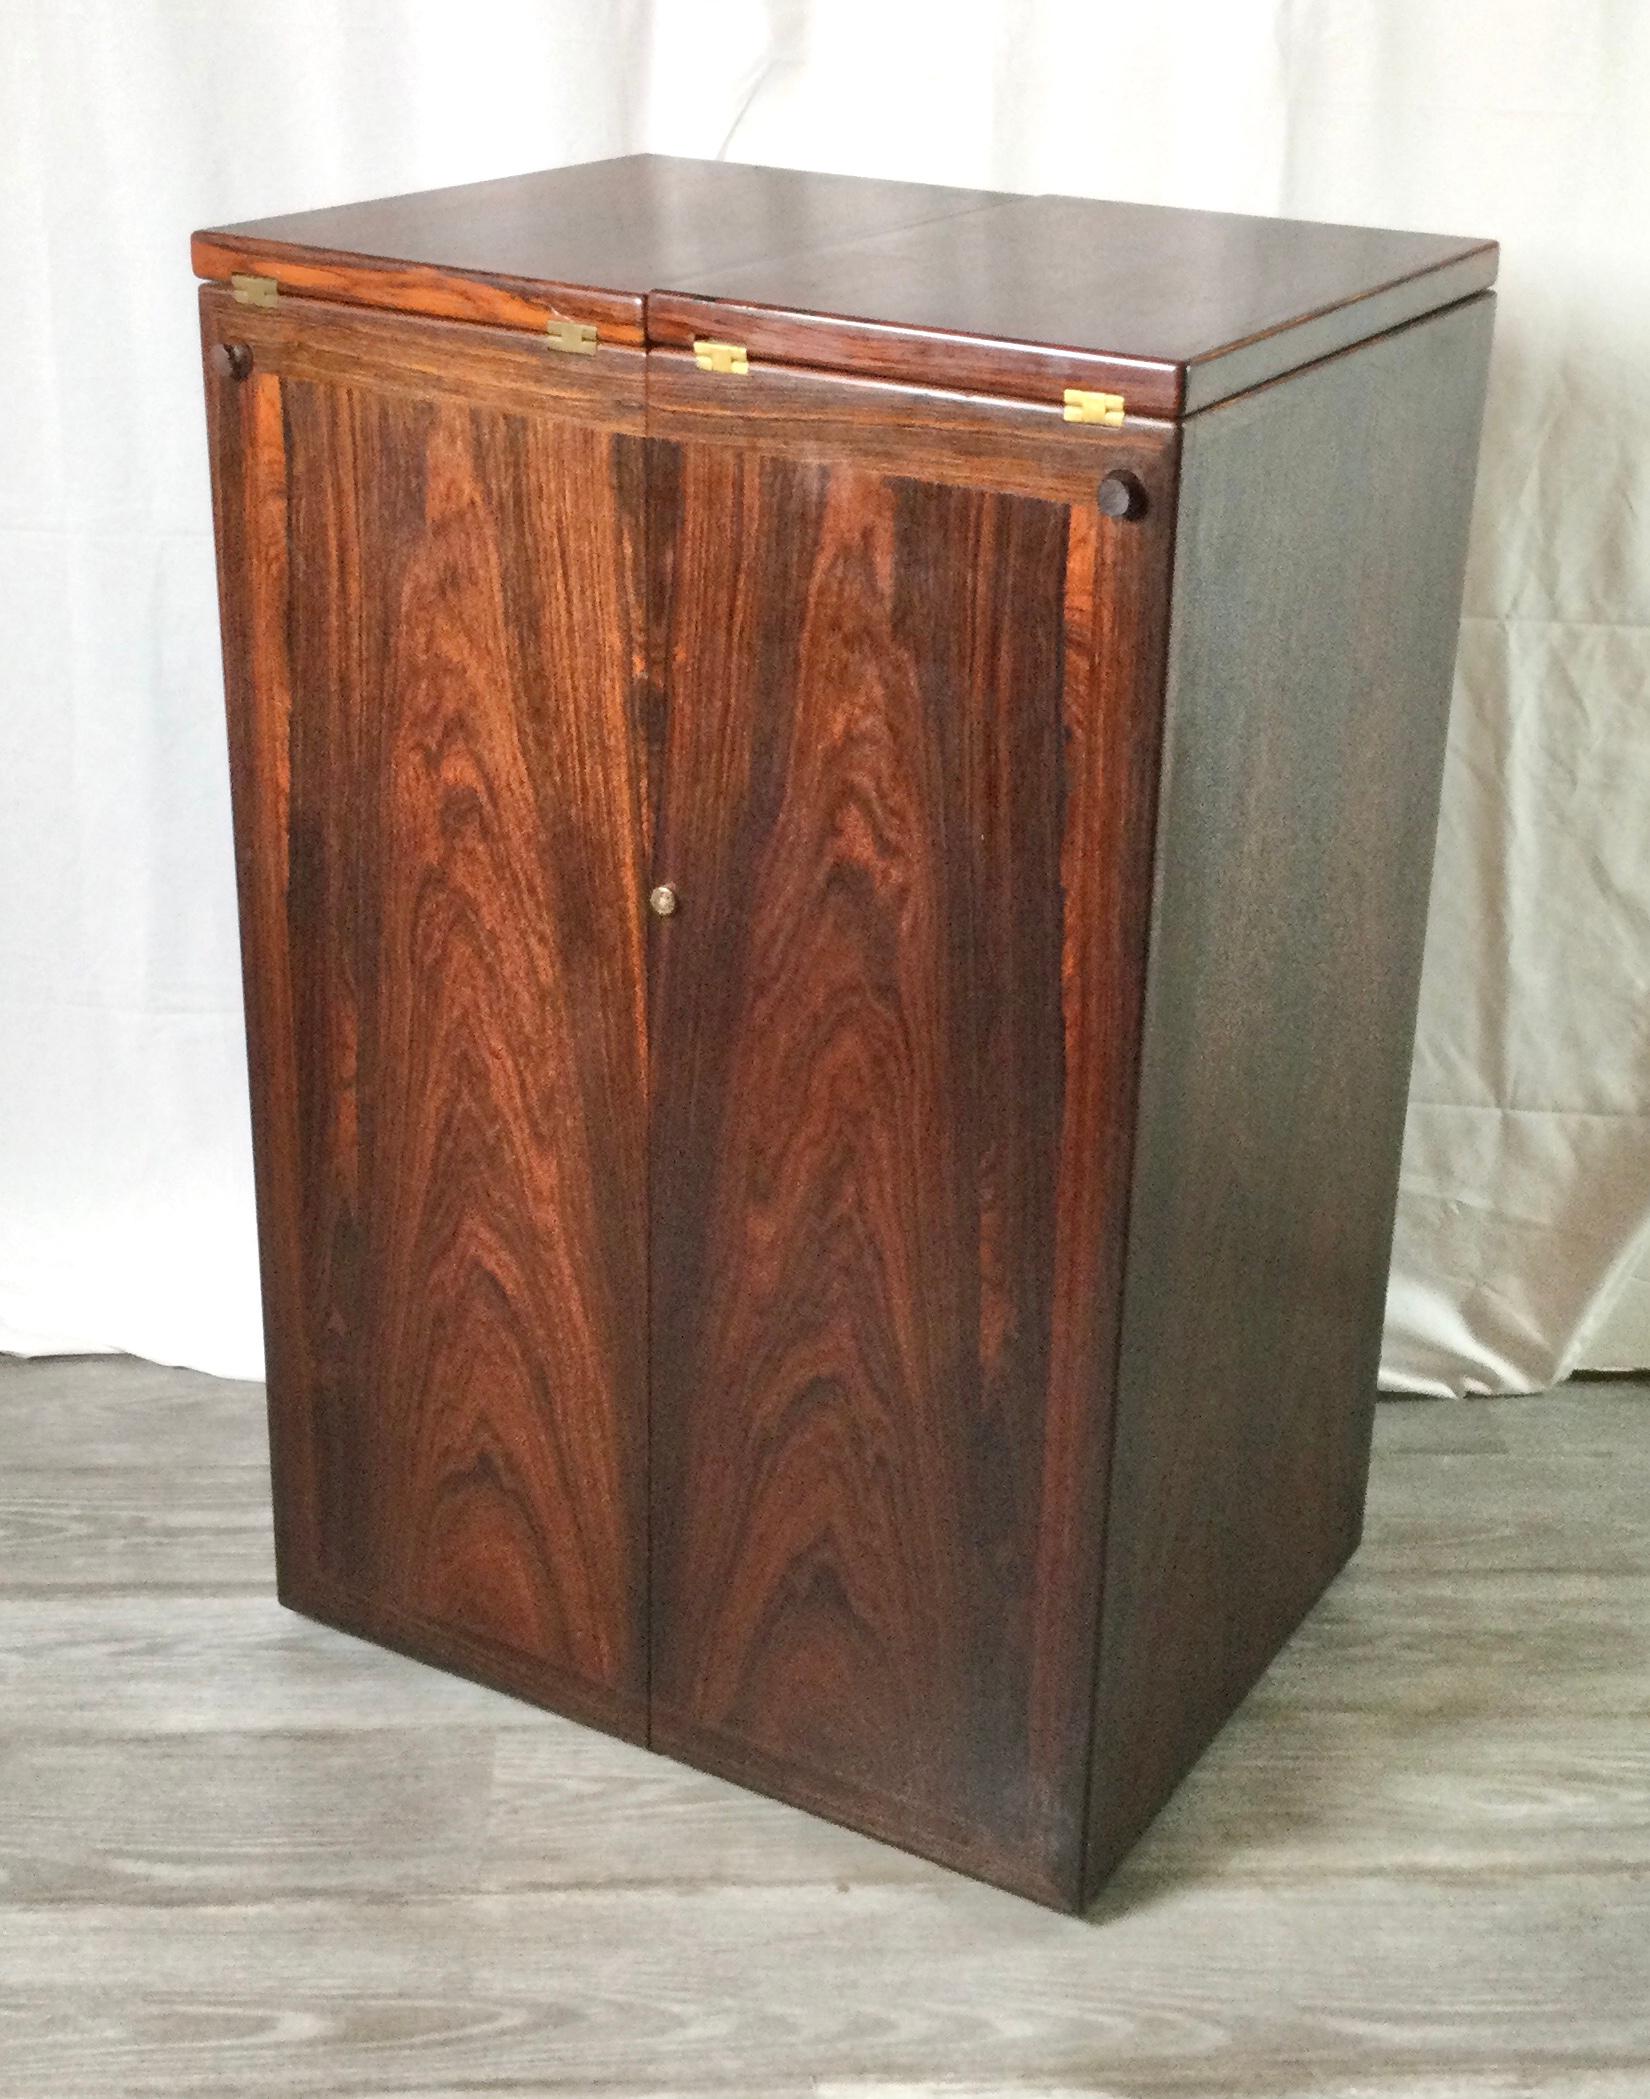 20th Century Danish Modern Rosewood Captains Bar by Reno Wahl Iversen Made by Dyrlund